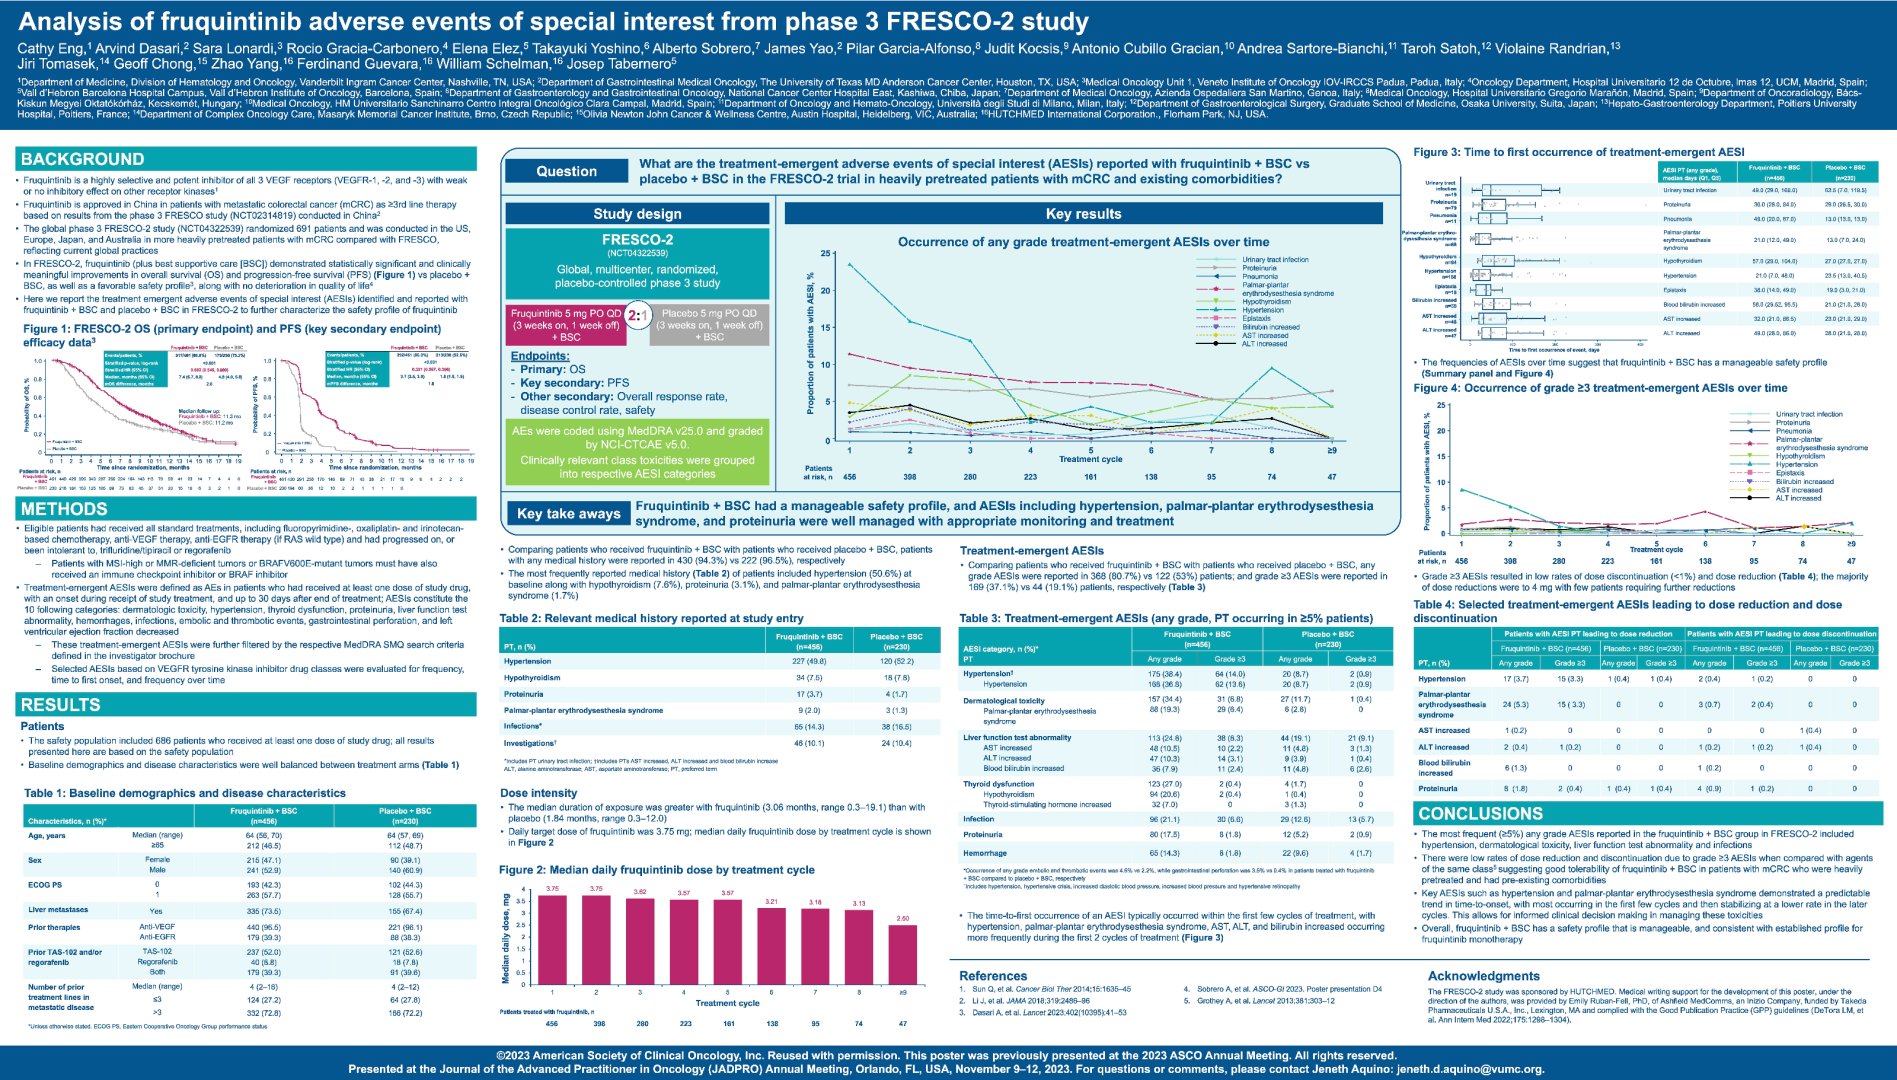 JL1103ES: Analysis of fruquintinib adverse events of special interest from phase 3 of the FRESCO-2 study icon